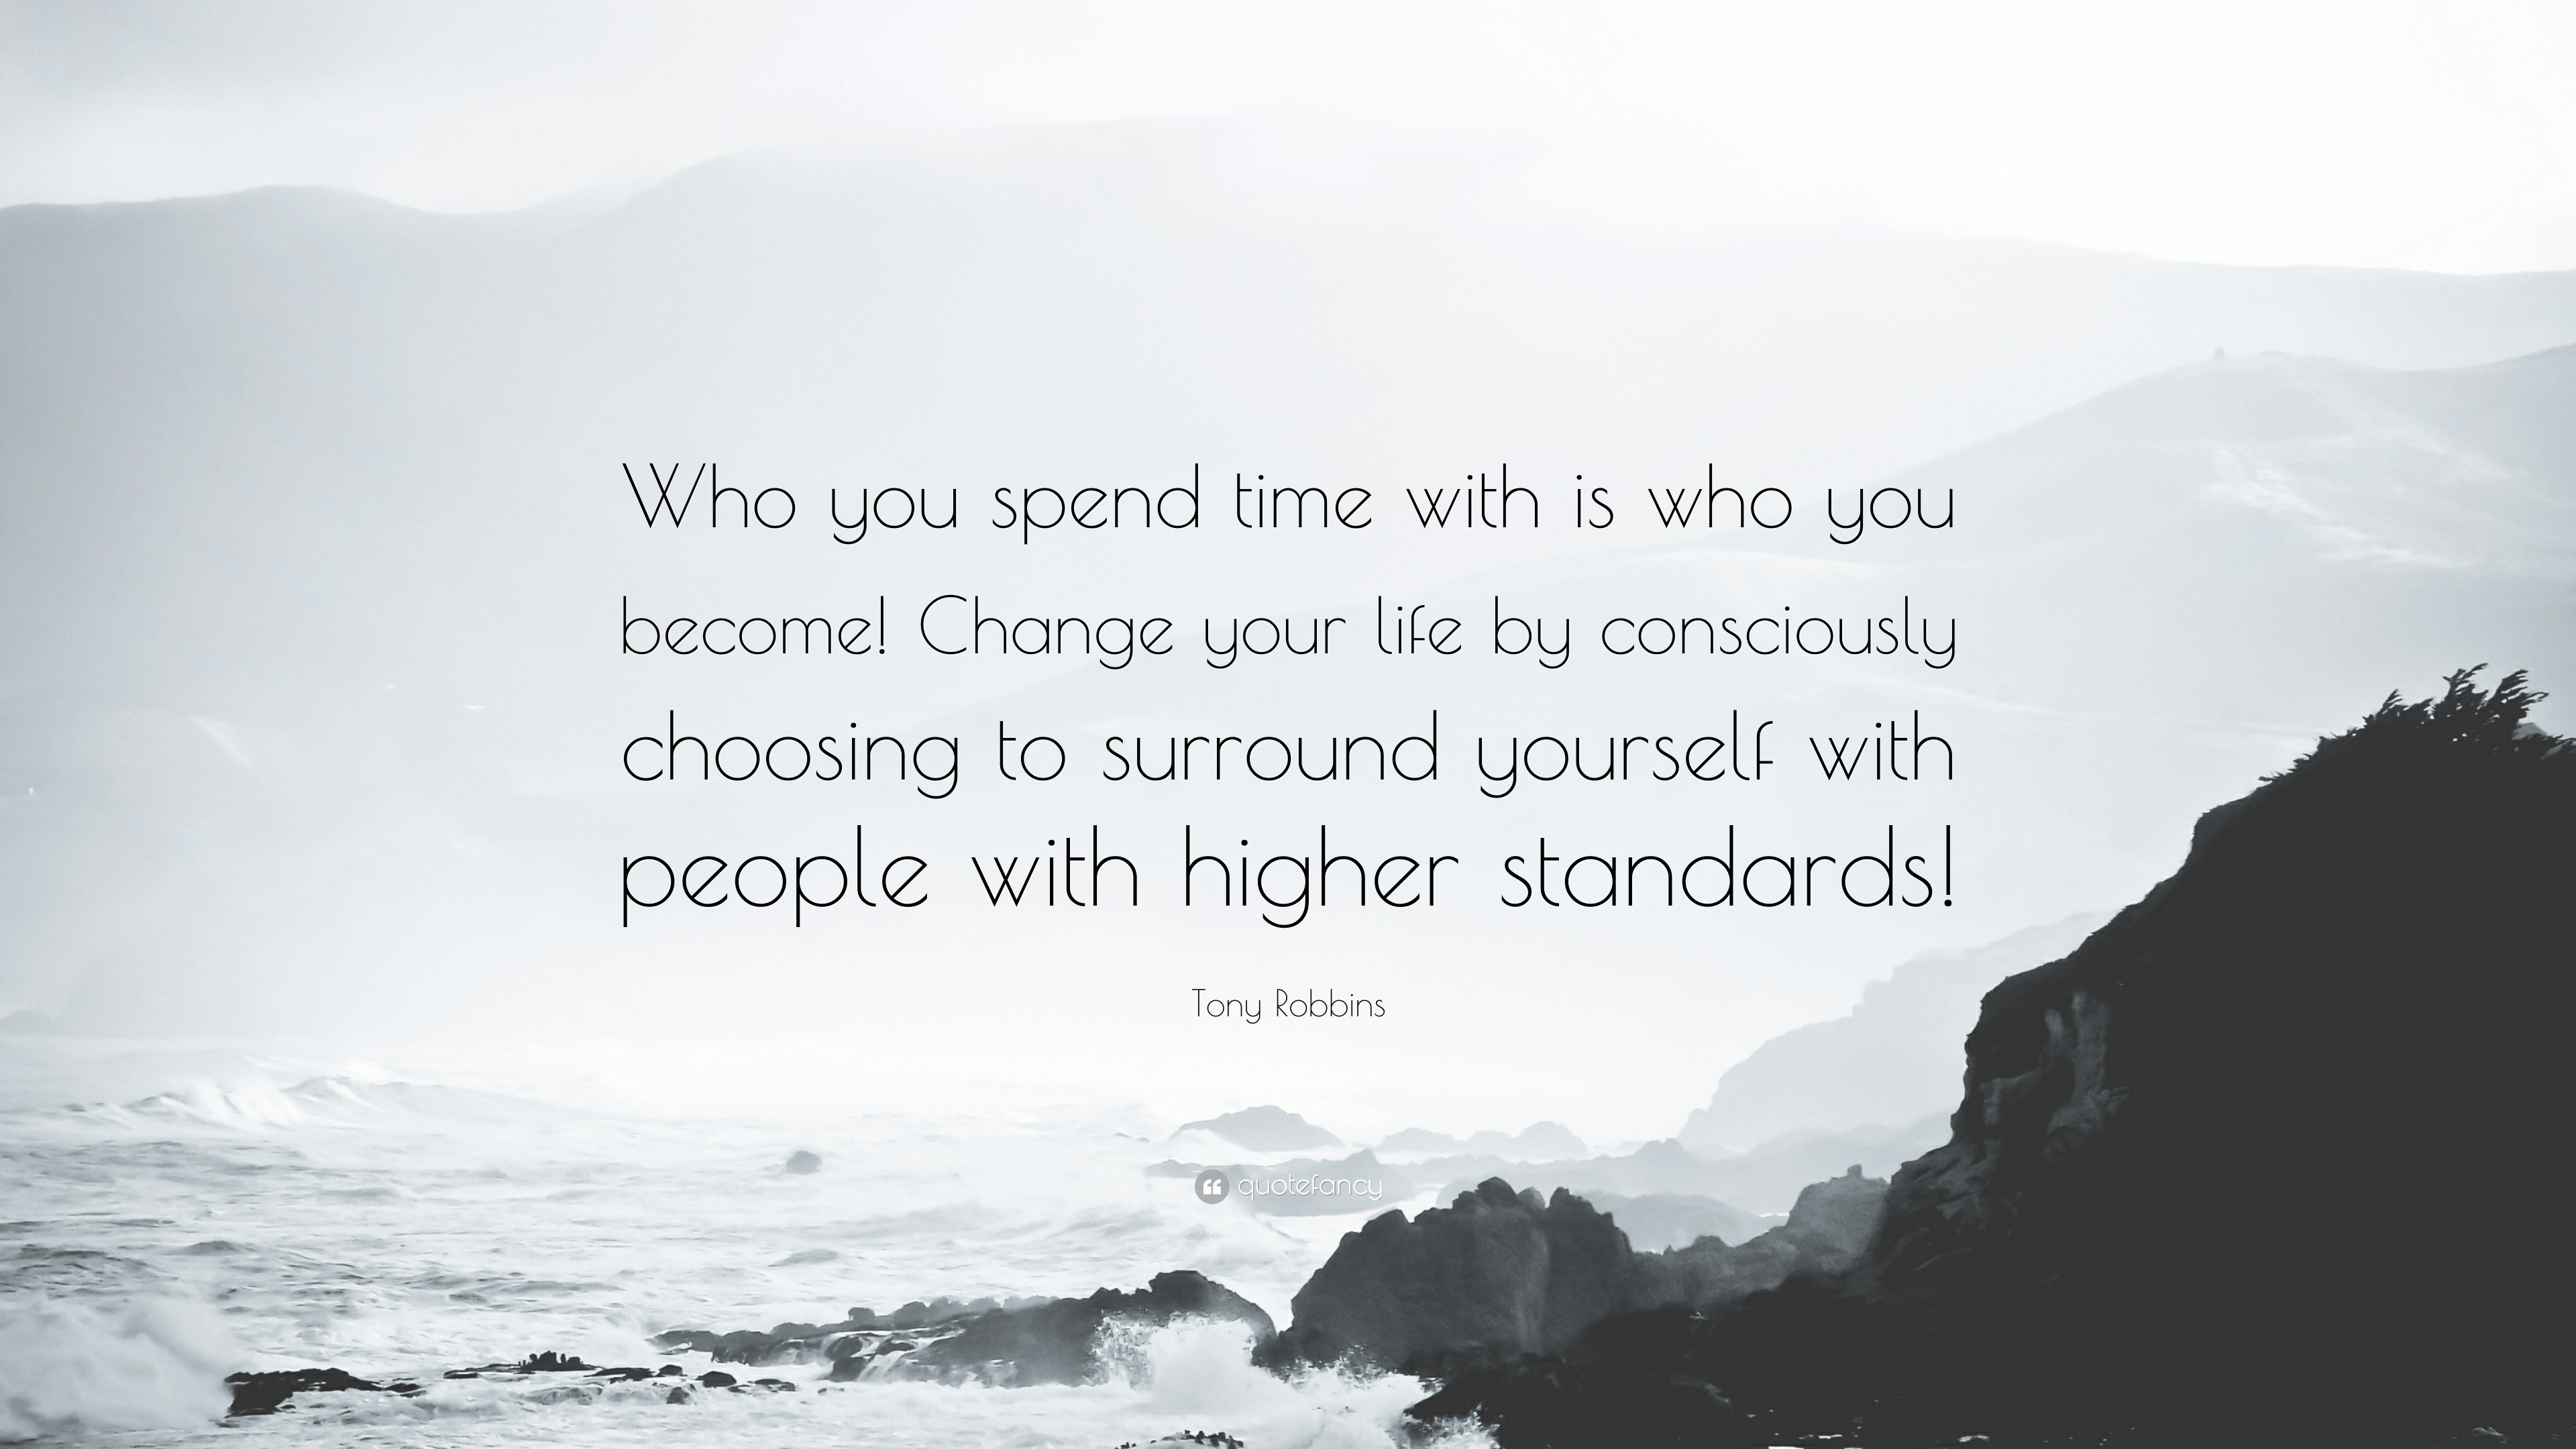 Tony Robbins Quote “Who you spend time with is who you be e Change